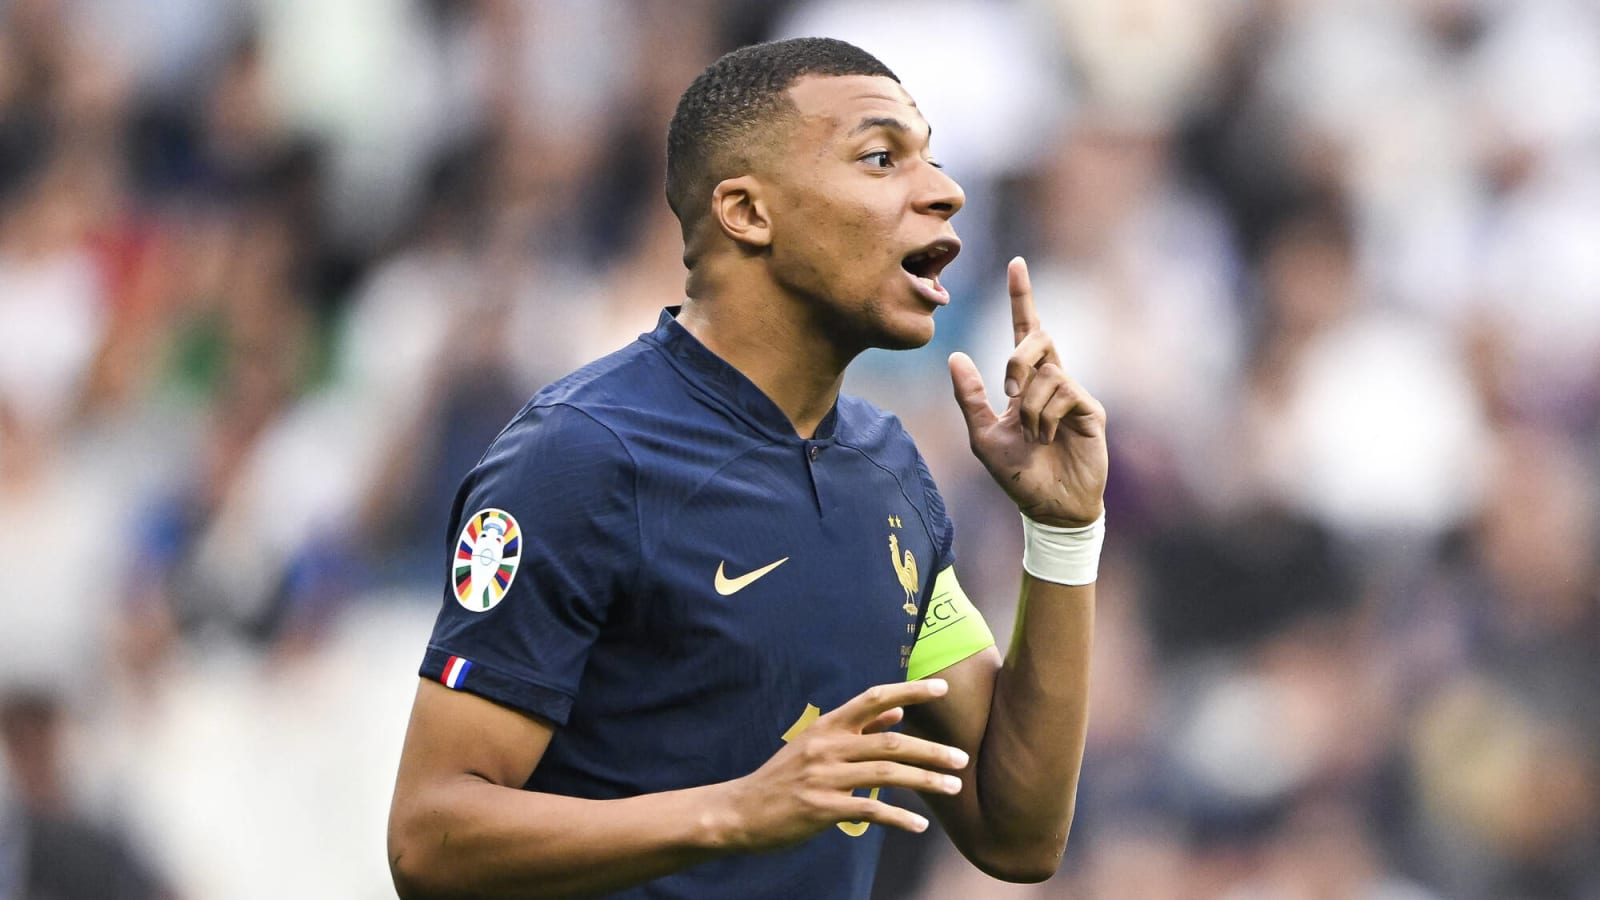 PSG set Kylian Mbappe an ultimatum with decision expected before 31 July